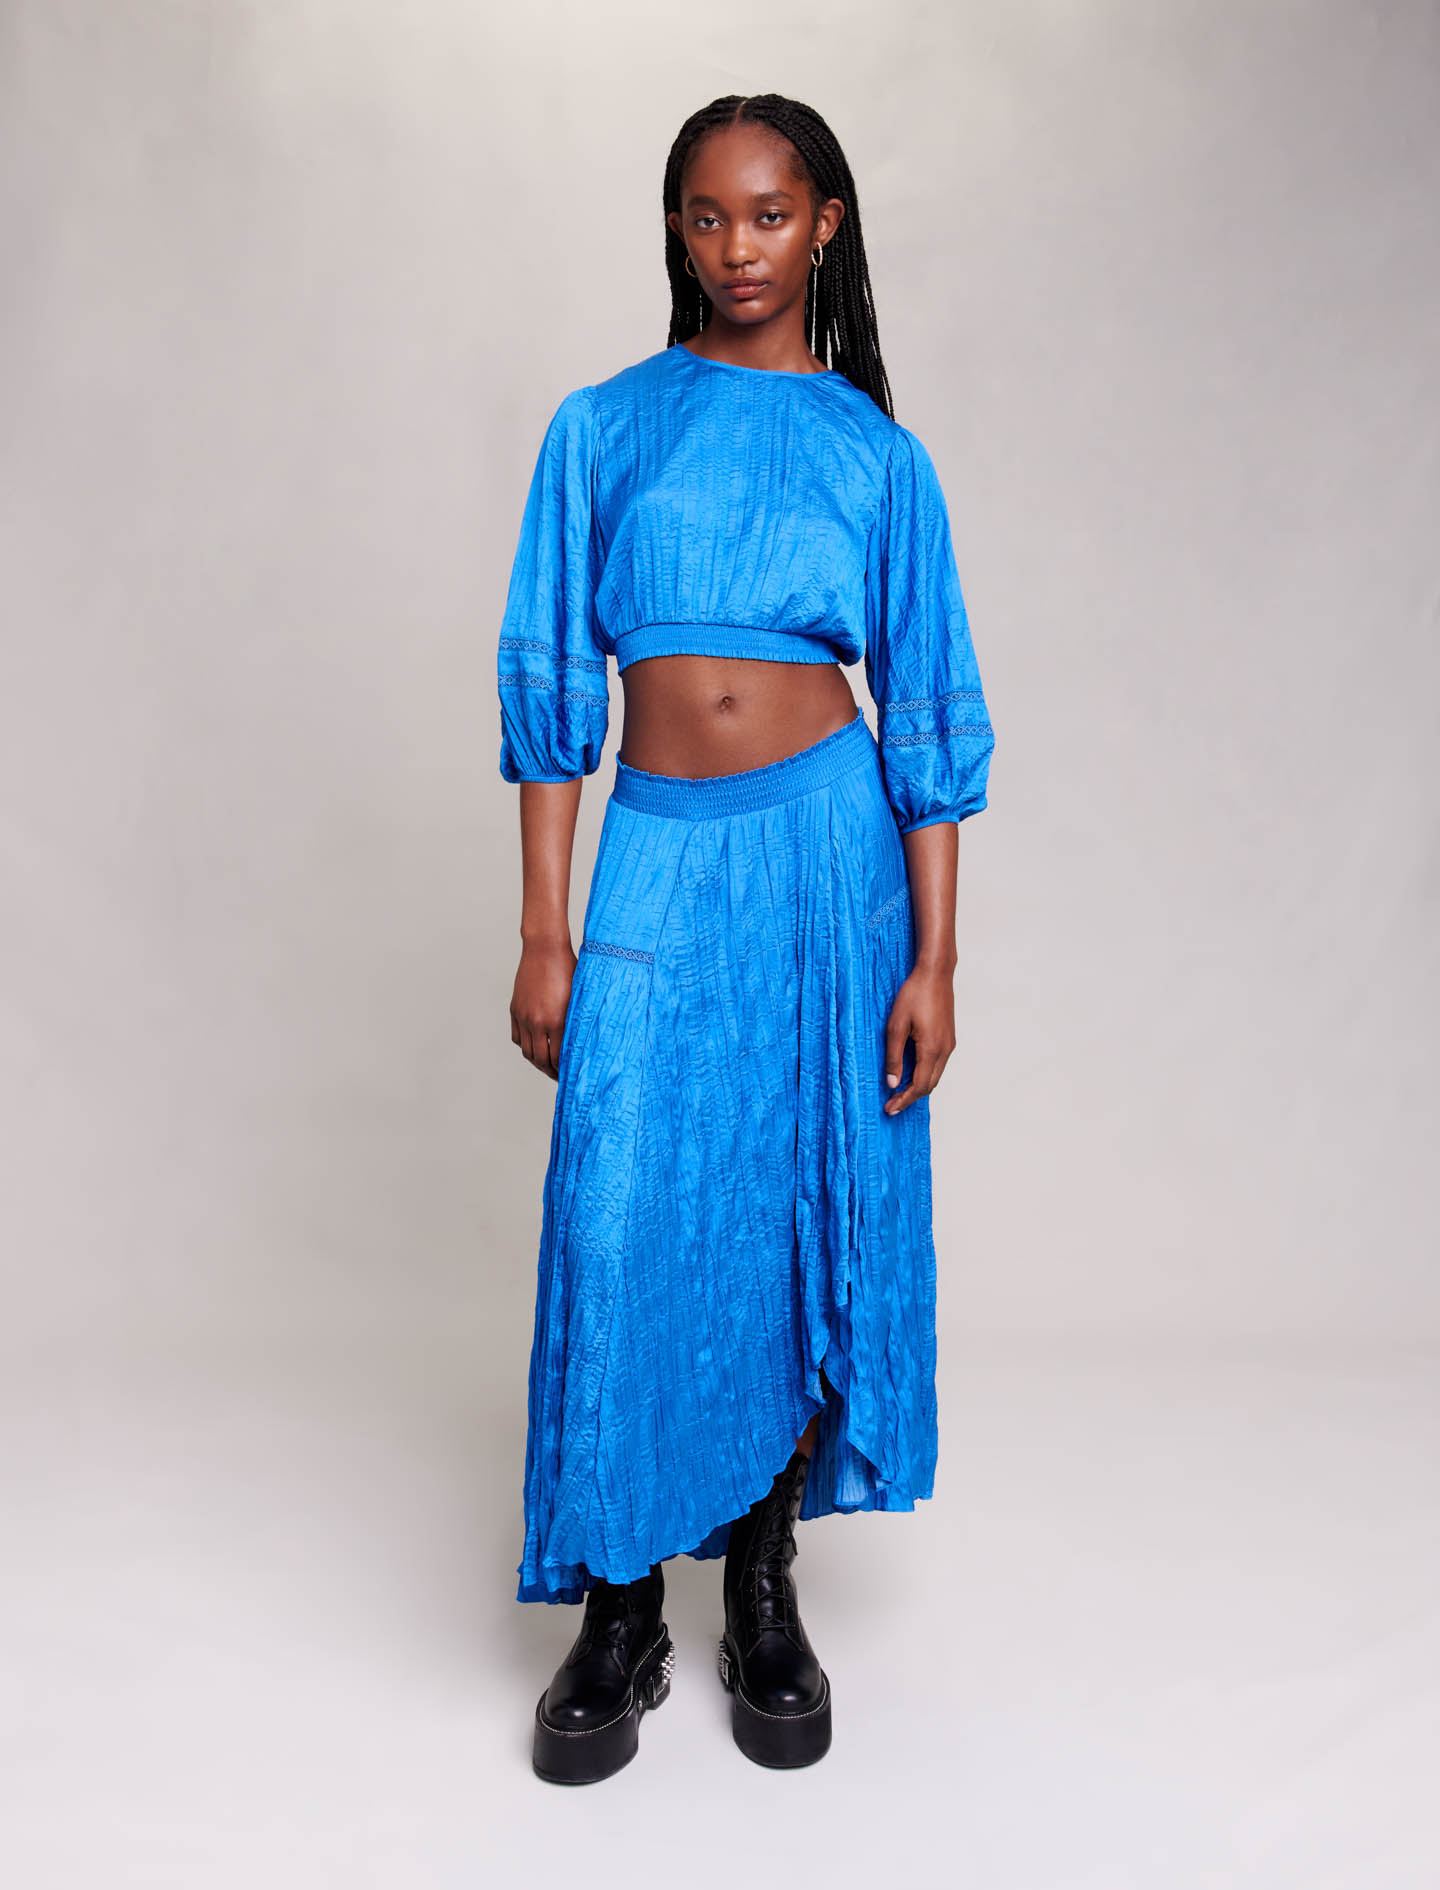 Maje Woman's polyester Lace: Long skirt for Fall/Winter, in color Blue / Blue